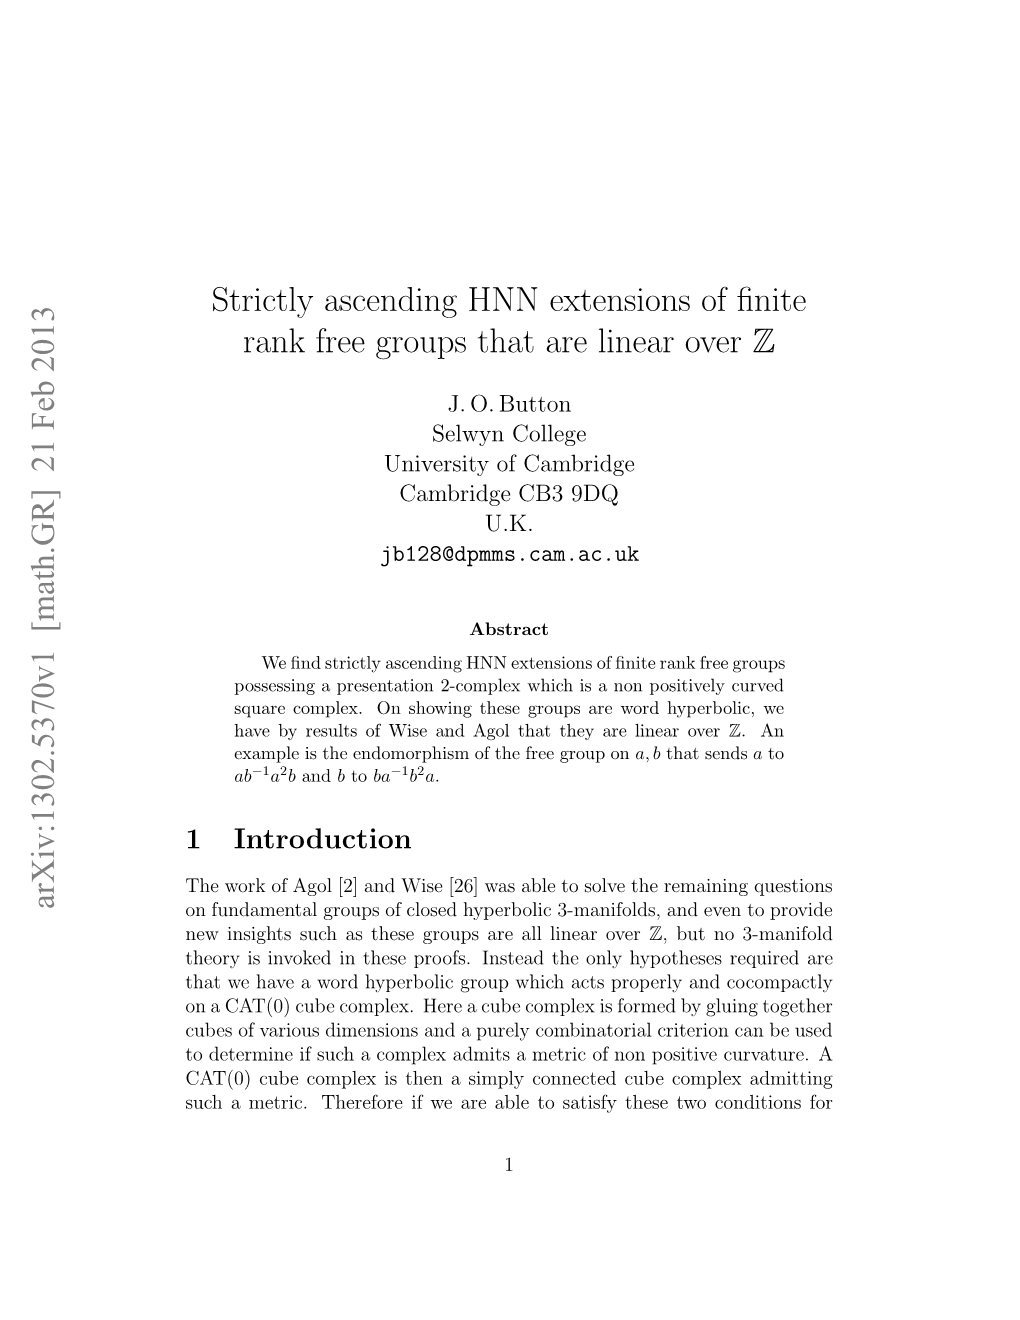 Strictly Ascending HNN Extensions of Finite Rank Free Groups That Are